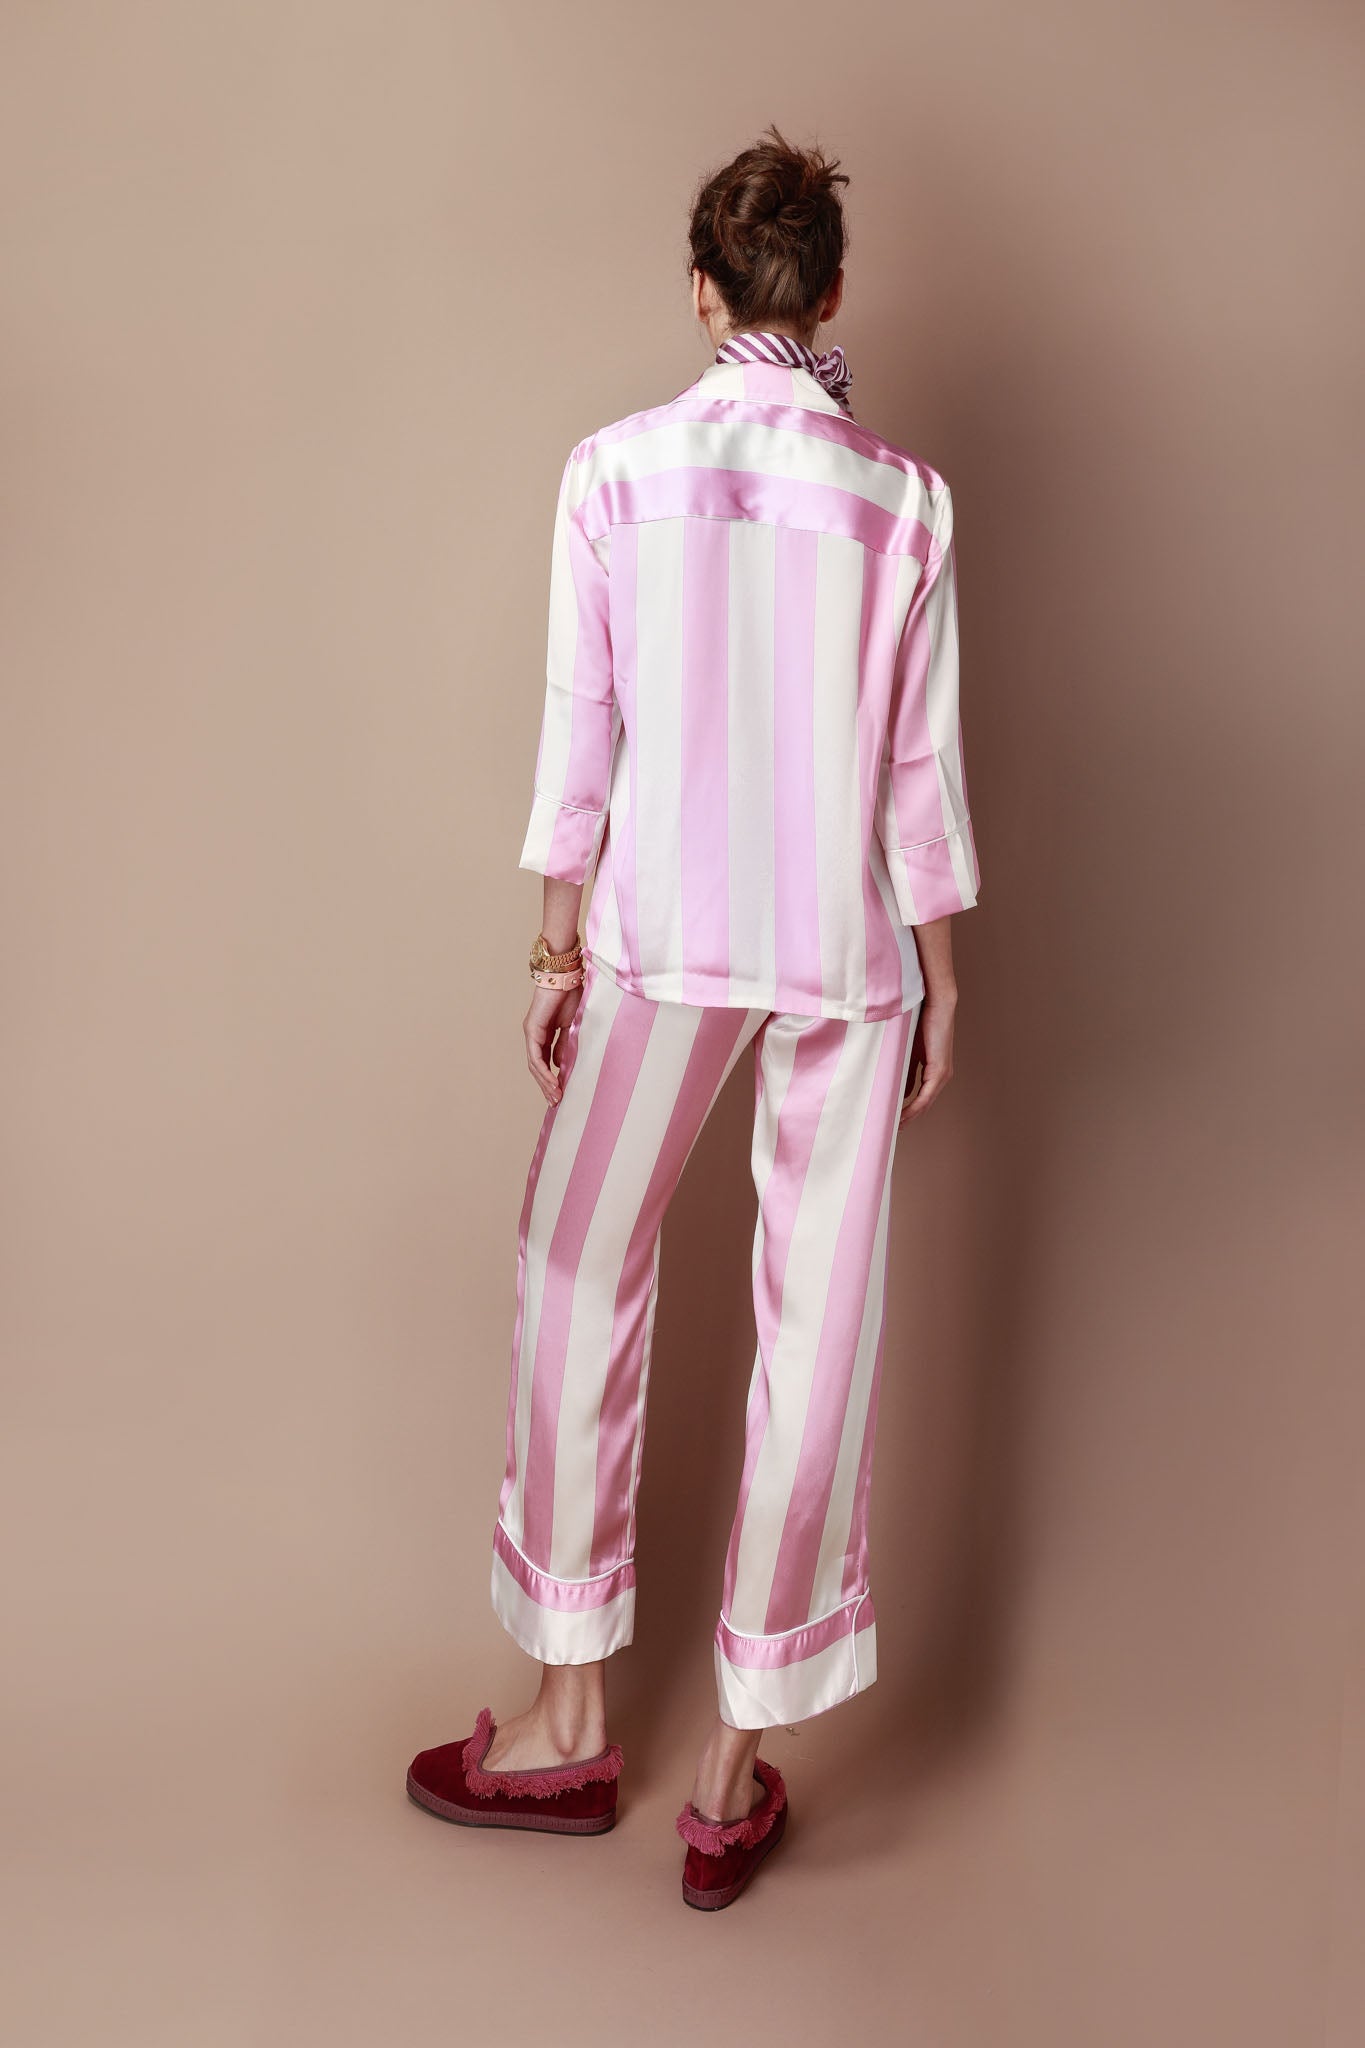 Silk Pajama Set in Striped Pastel Pink and White from the In Me I Trust Collection